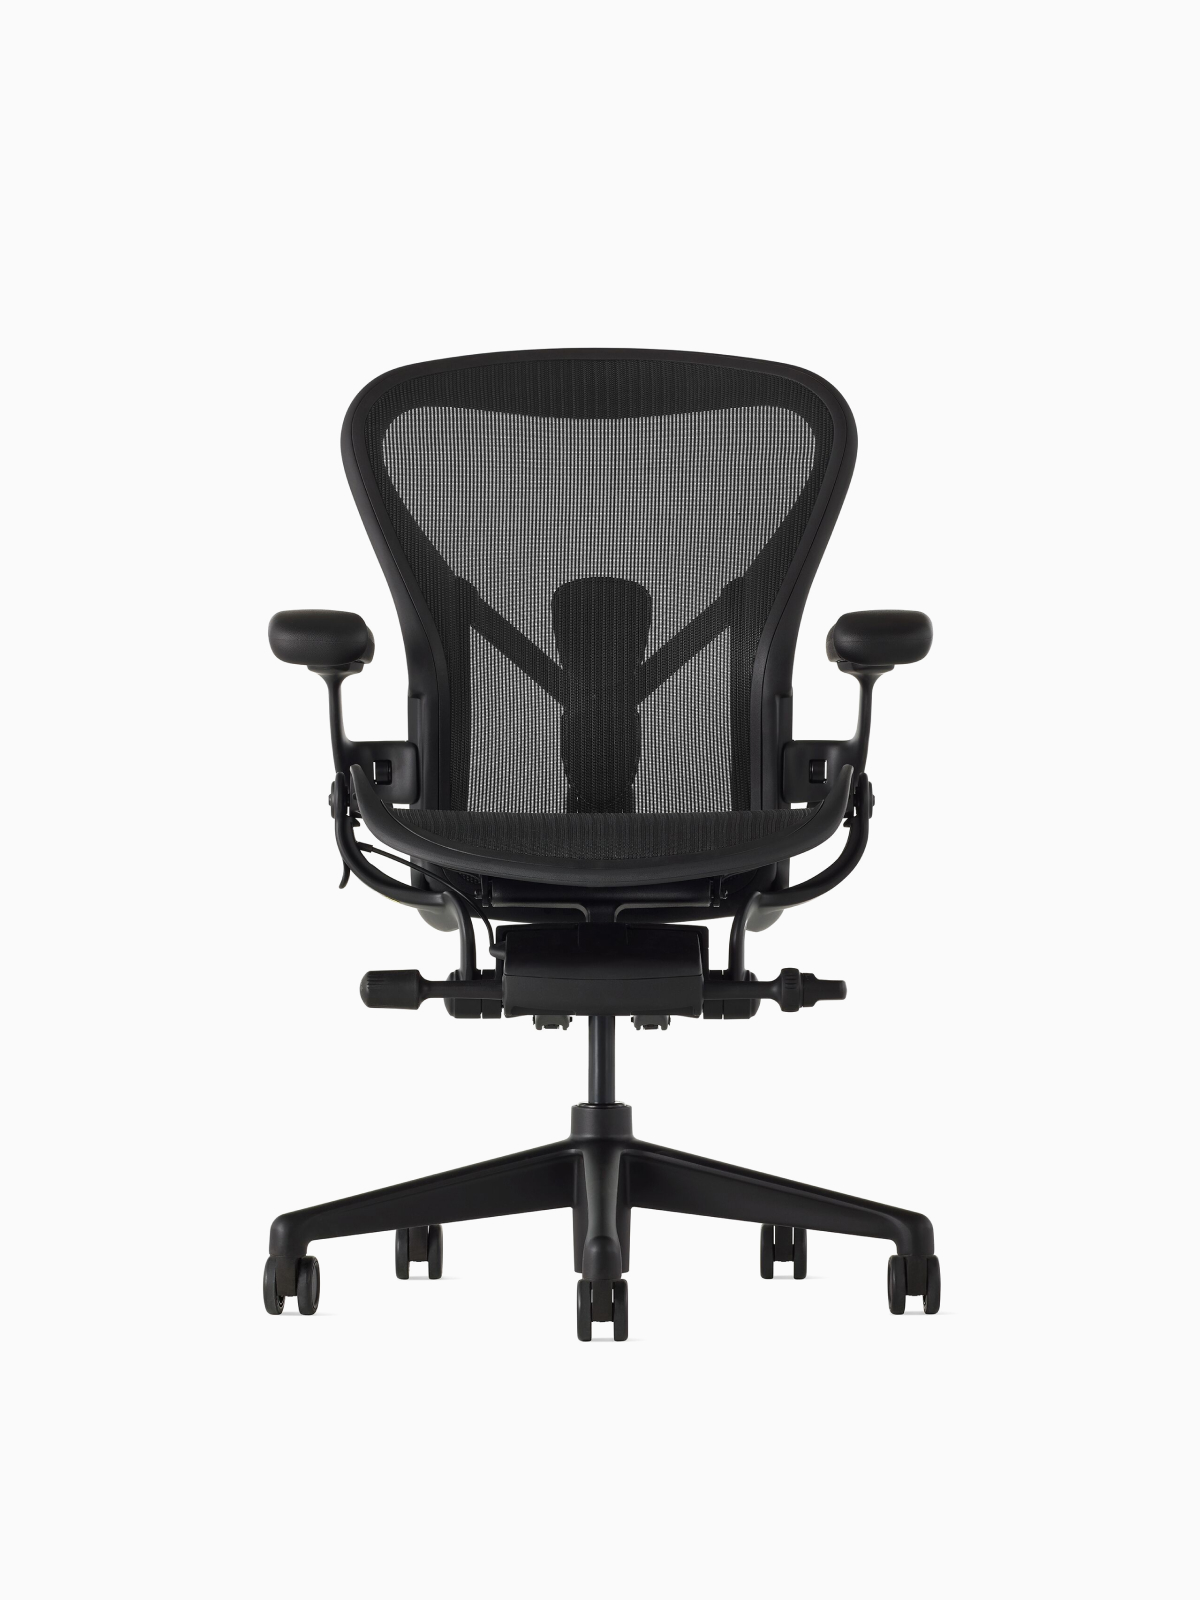 https://www.hermanmiller.com/content/dam/hmicom/page_assets/products/aeron_chair/202106/th_prd_aeron_chair_office_chairs_fn.jpg